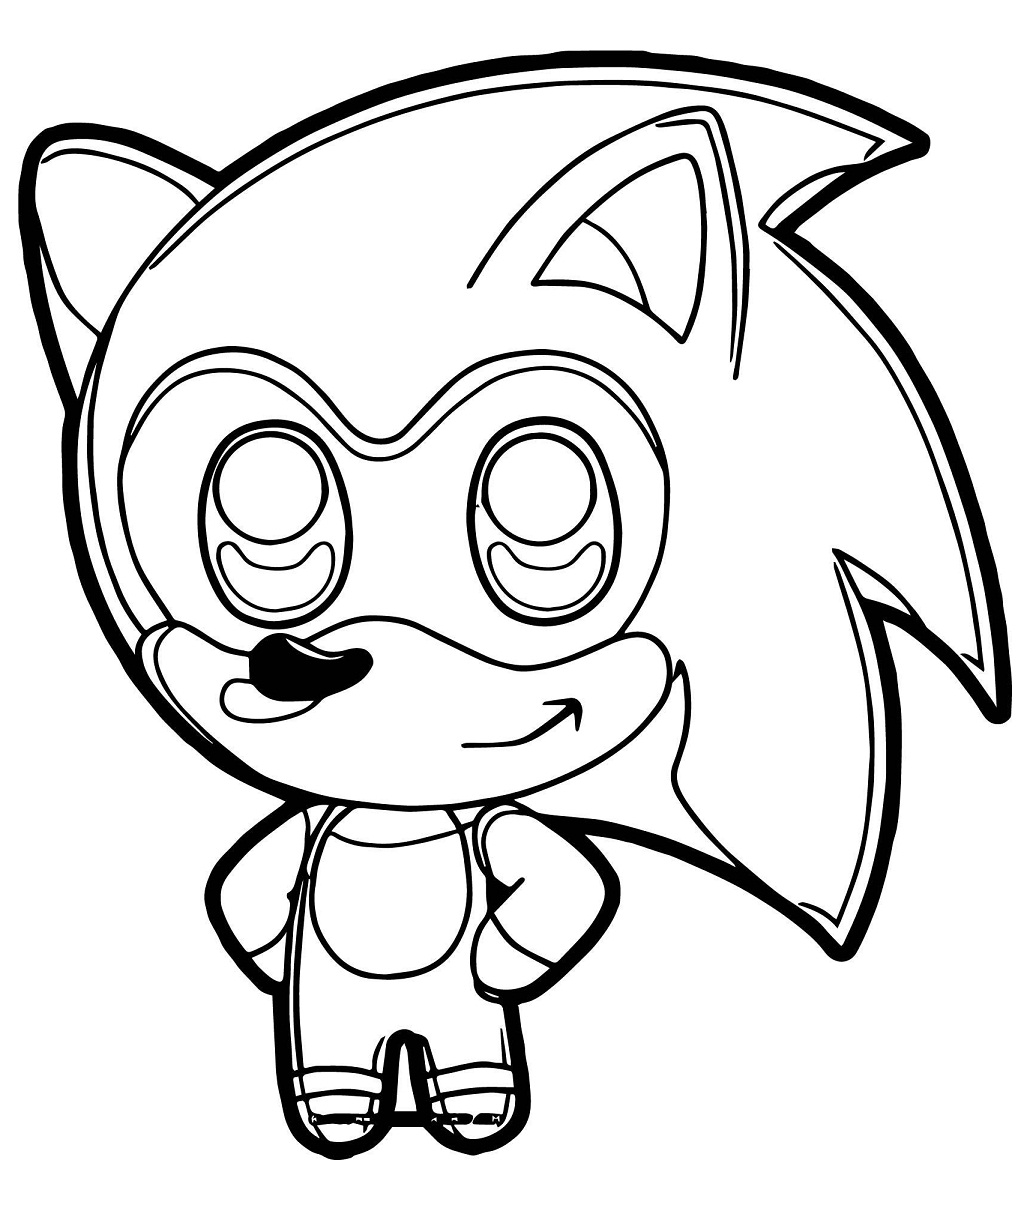 Printable Sonic Coloring Pages / Super Sonic Coloring Pages To Download